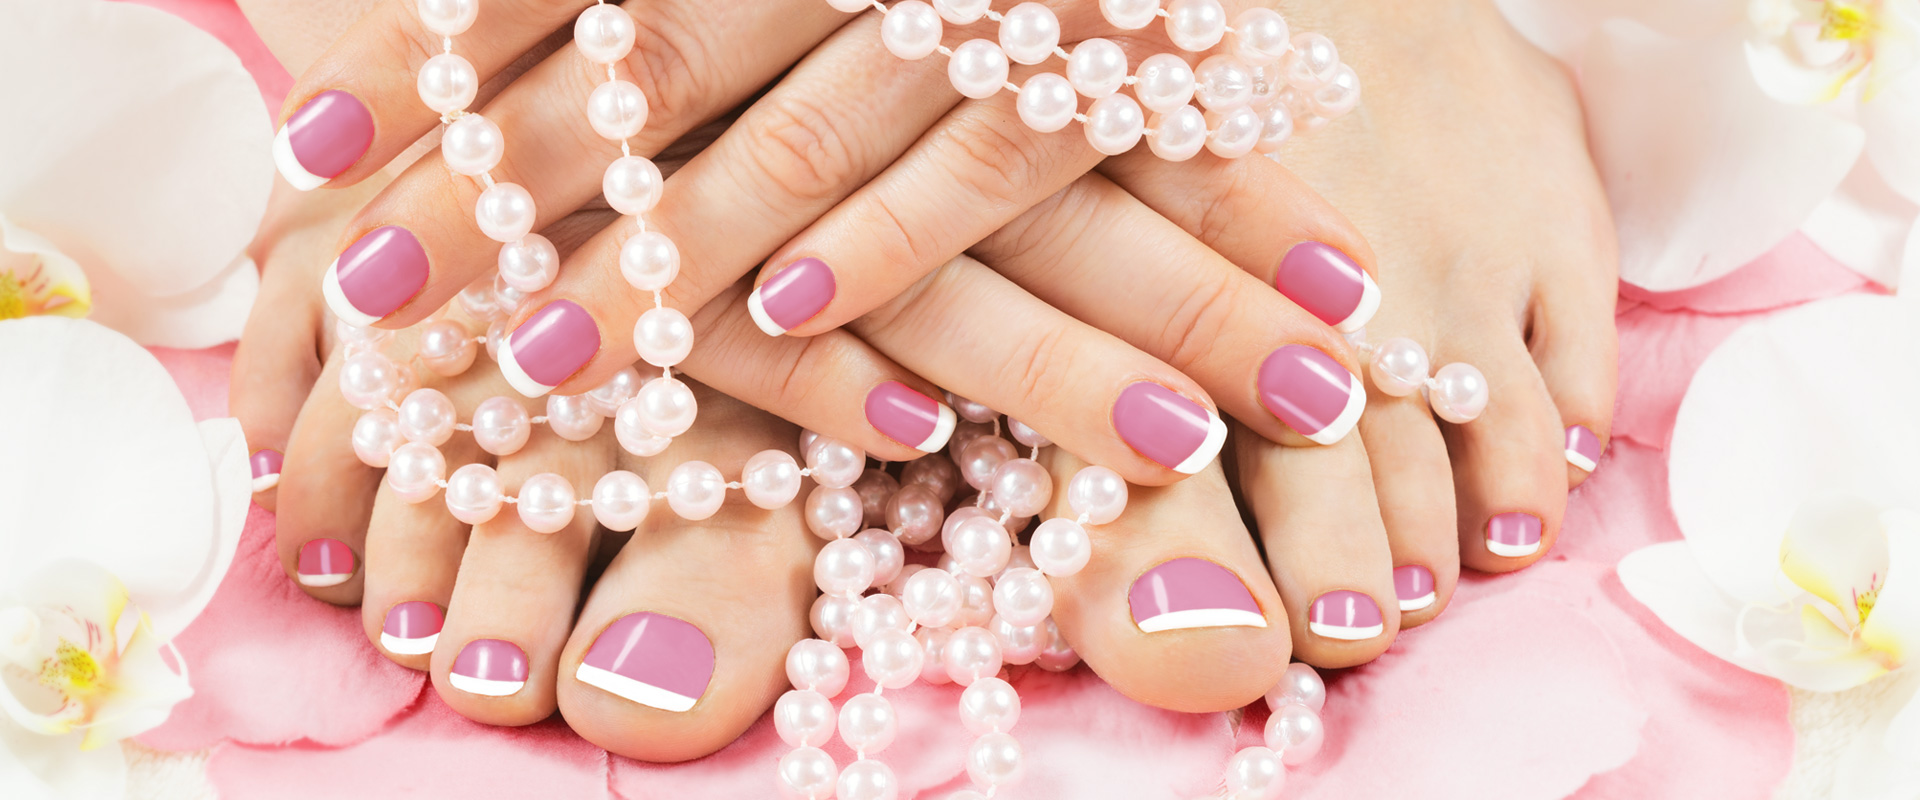 Manicures and Pedicures - wide 10